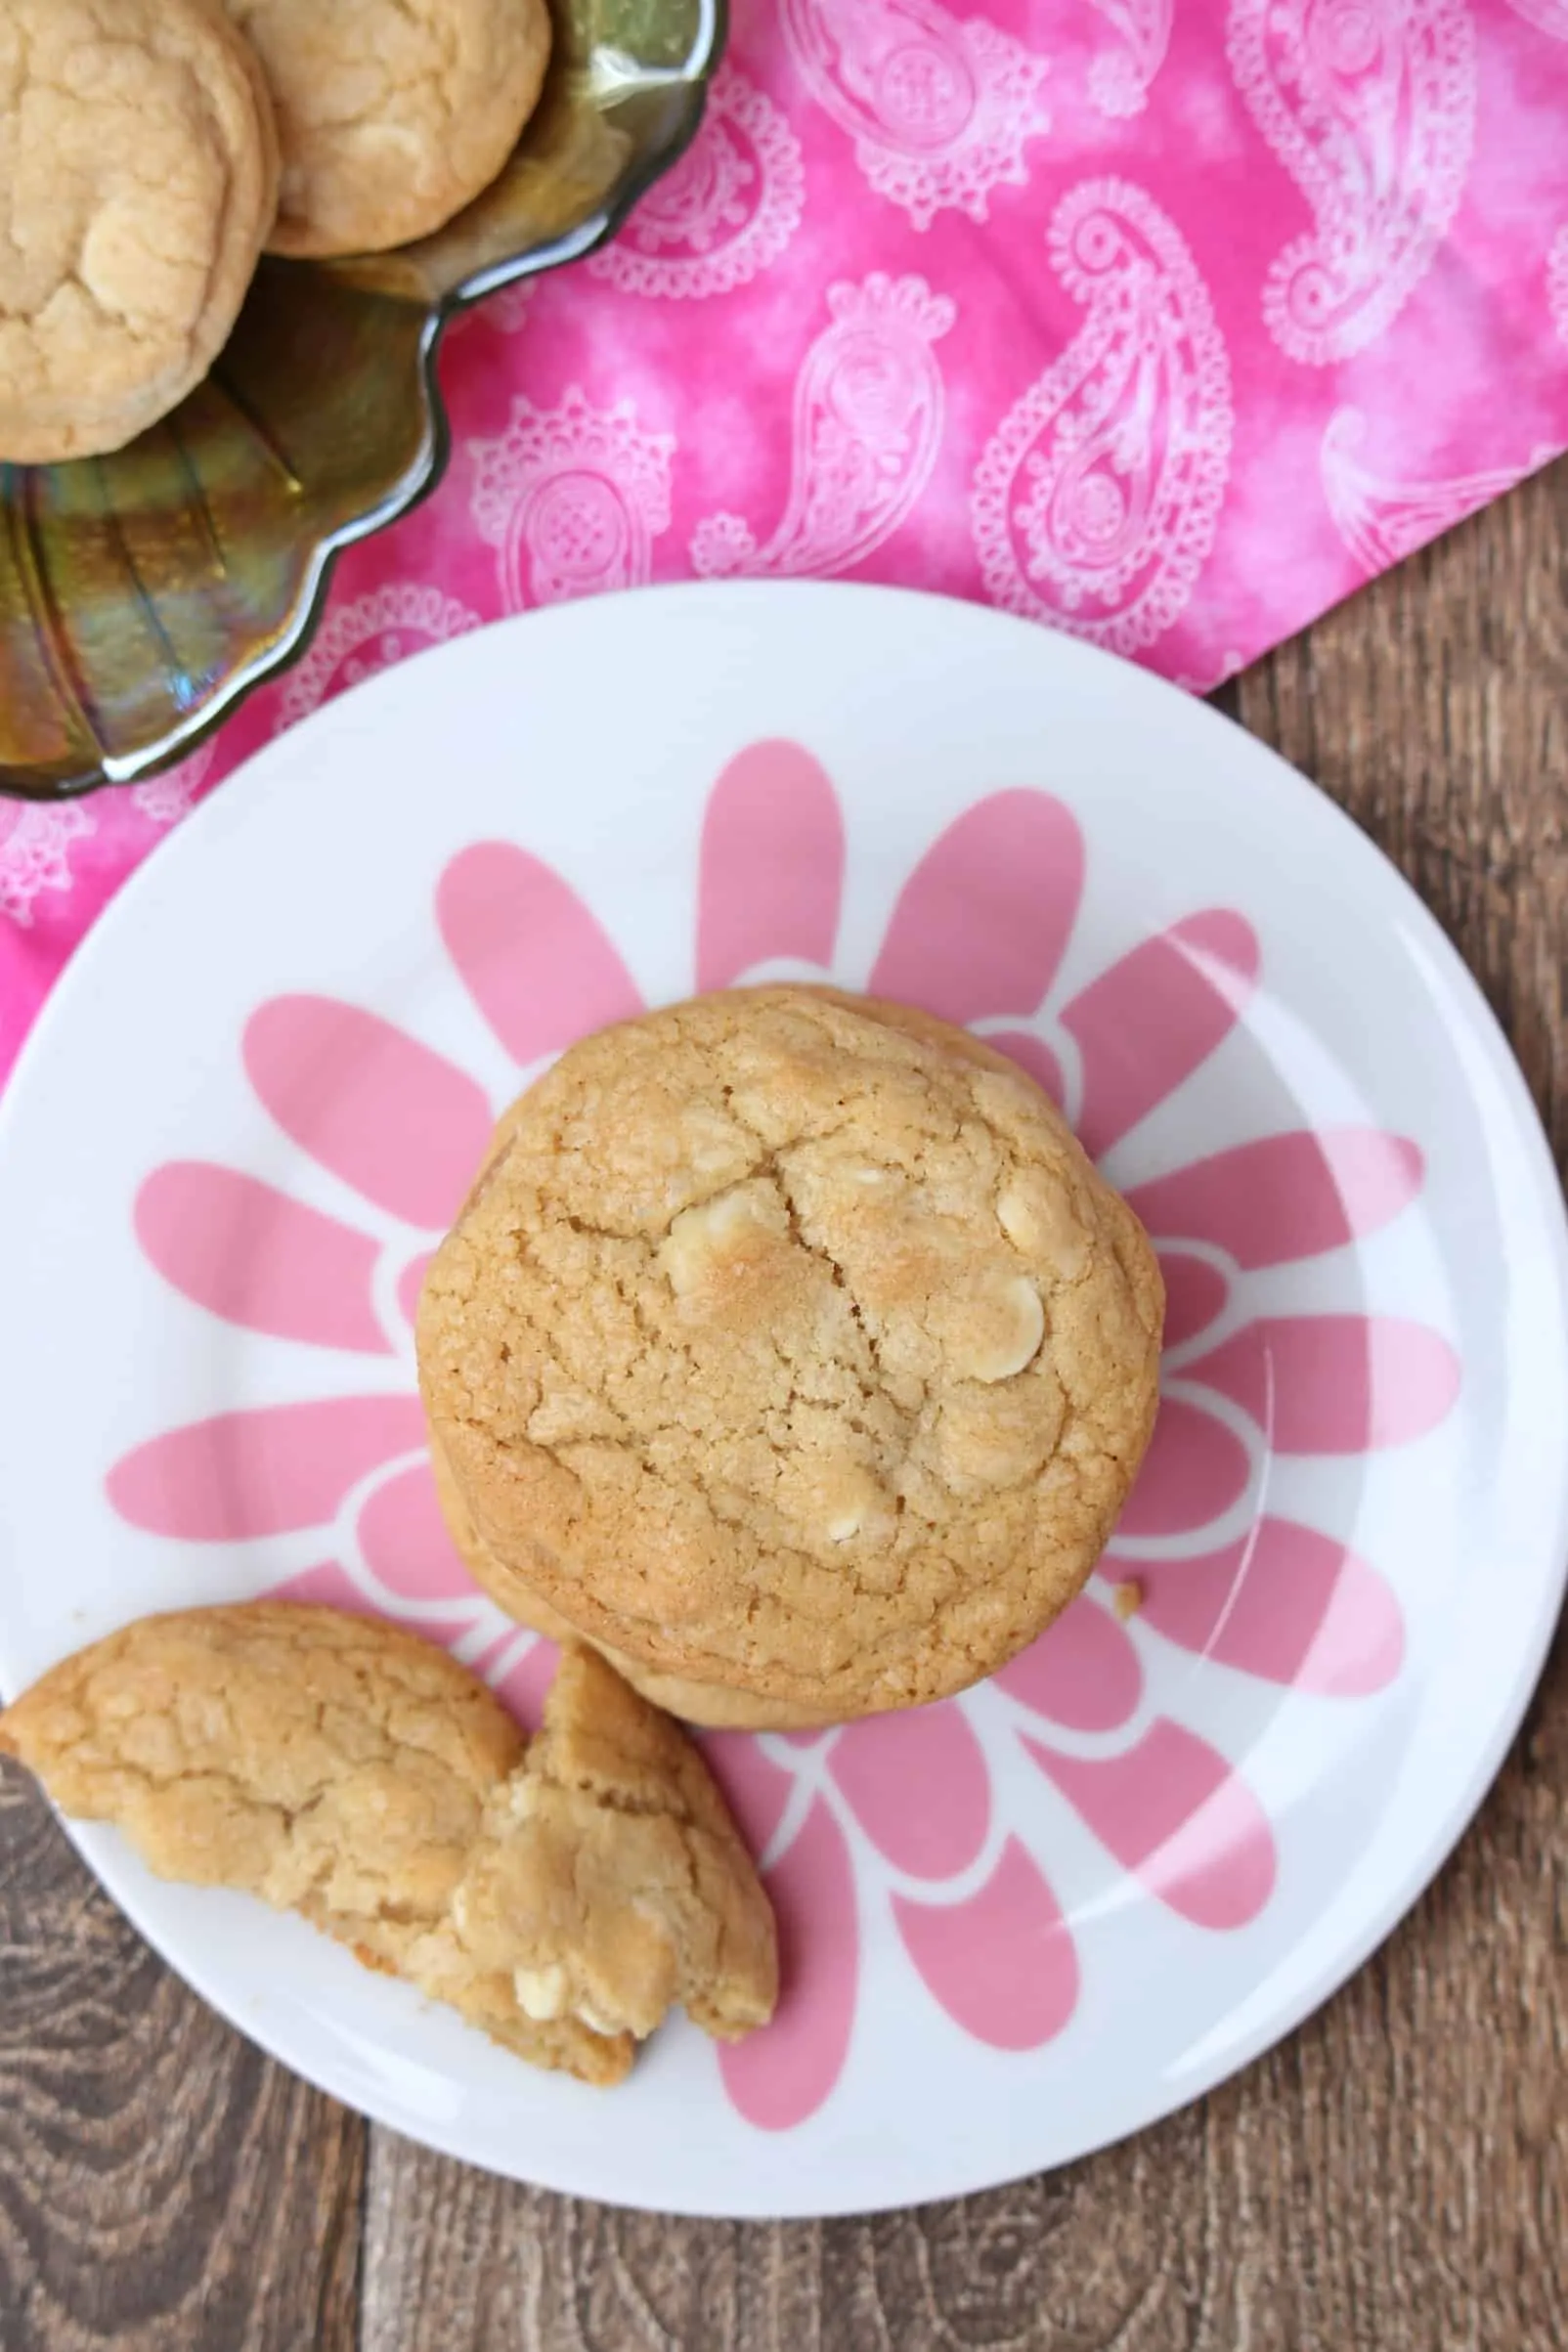 White Chocolate Macadamia Nut Cookies is serve in a dish.